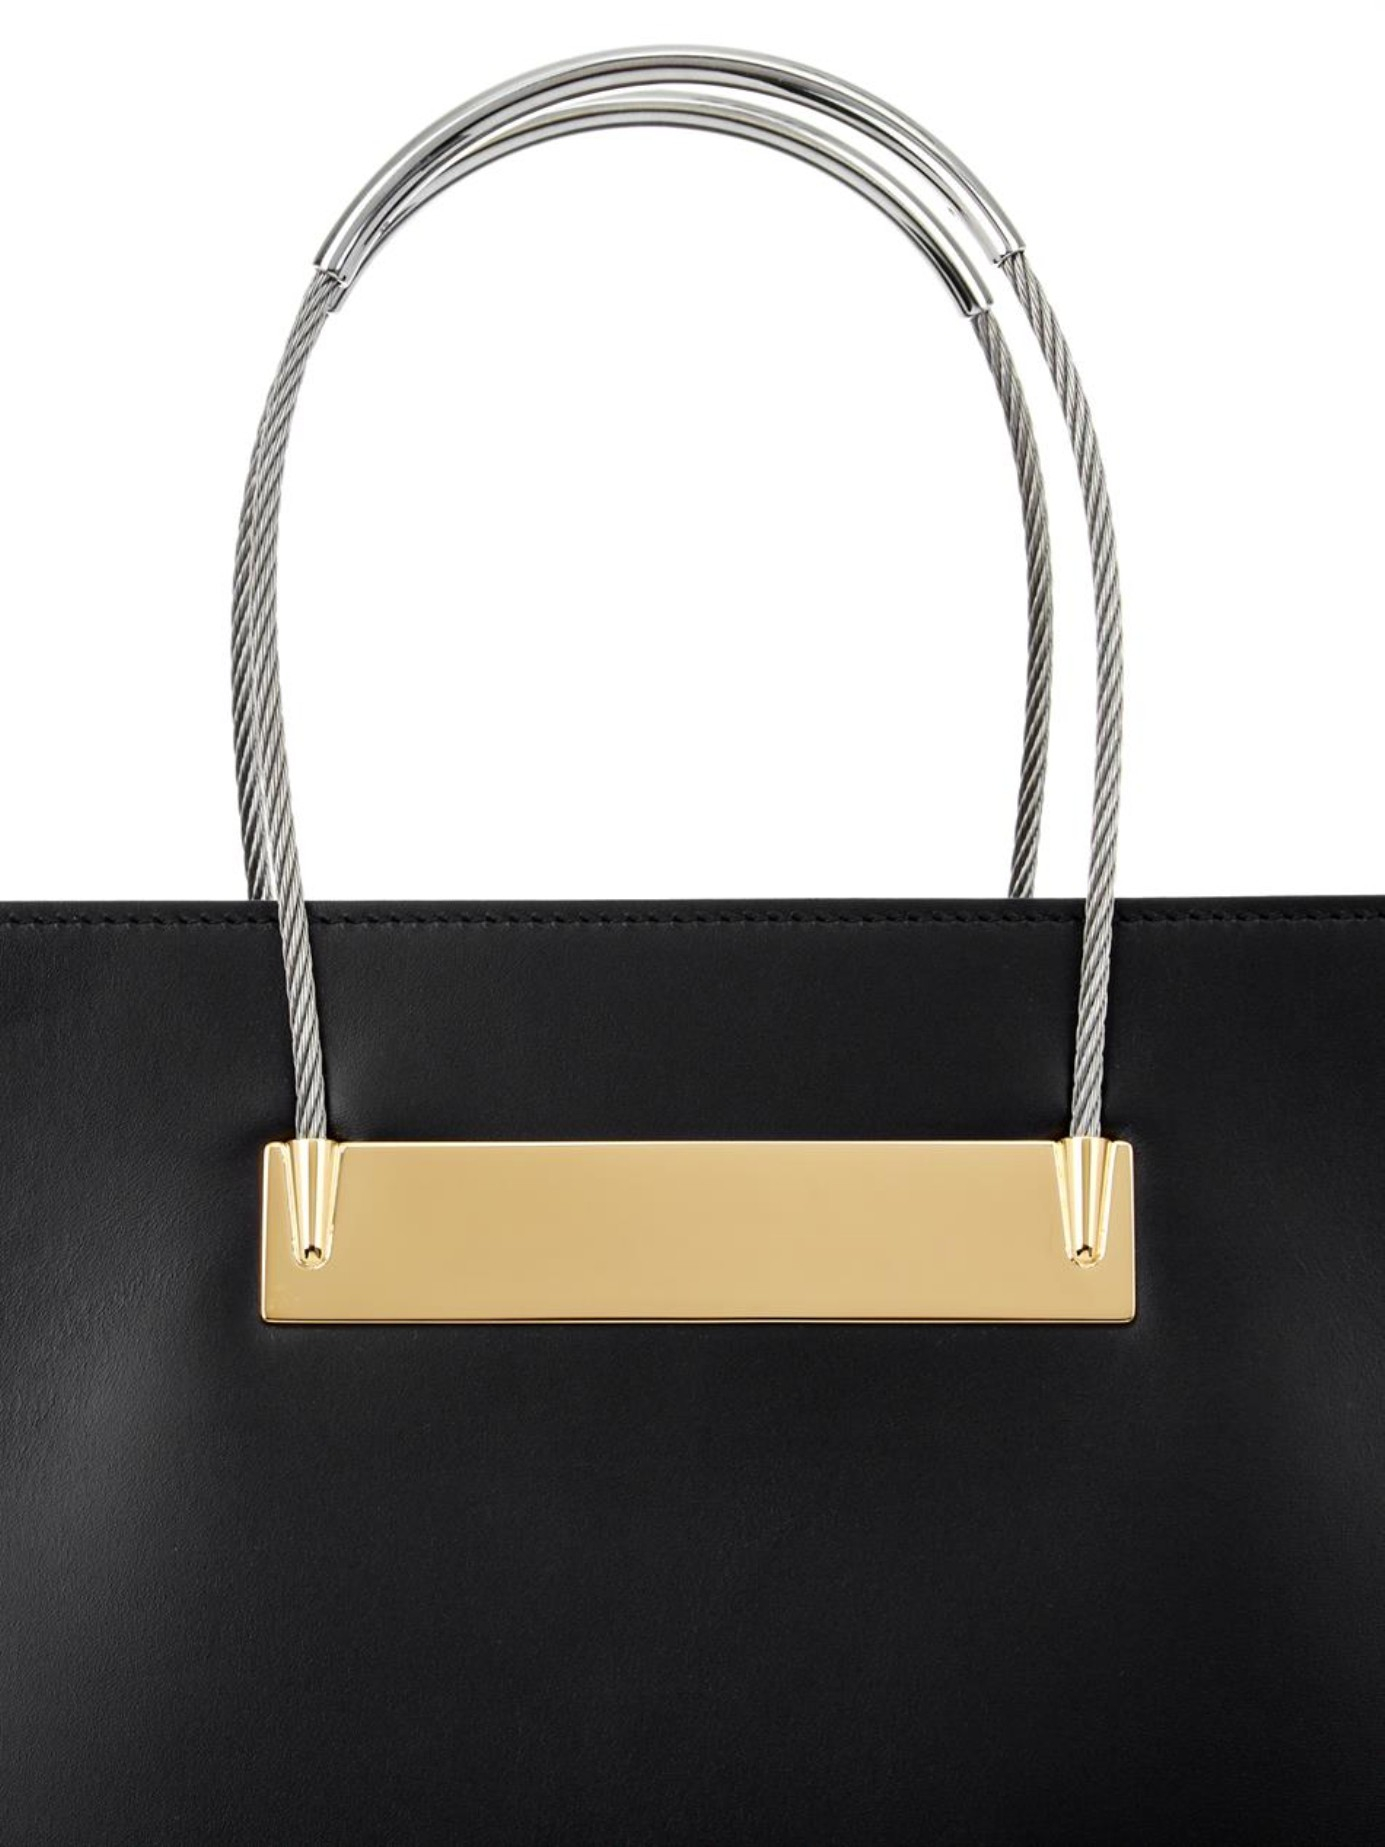 Balenciaga Cable Large Leather Shopper Bag in Black | Lyst